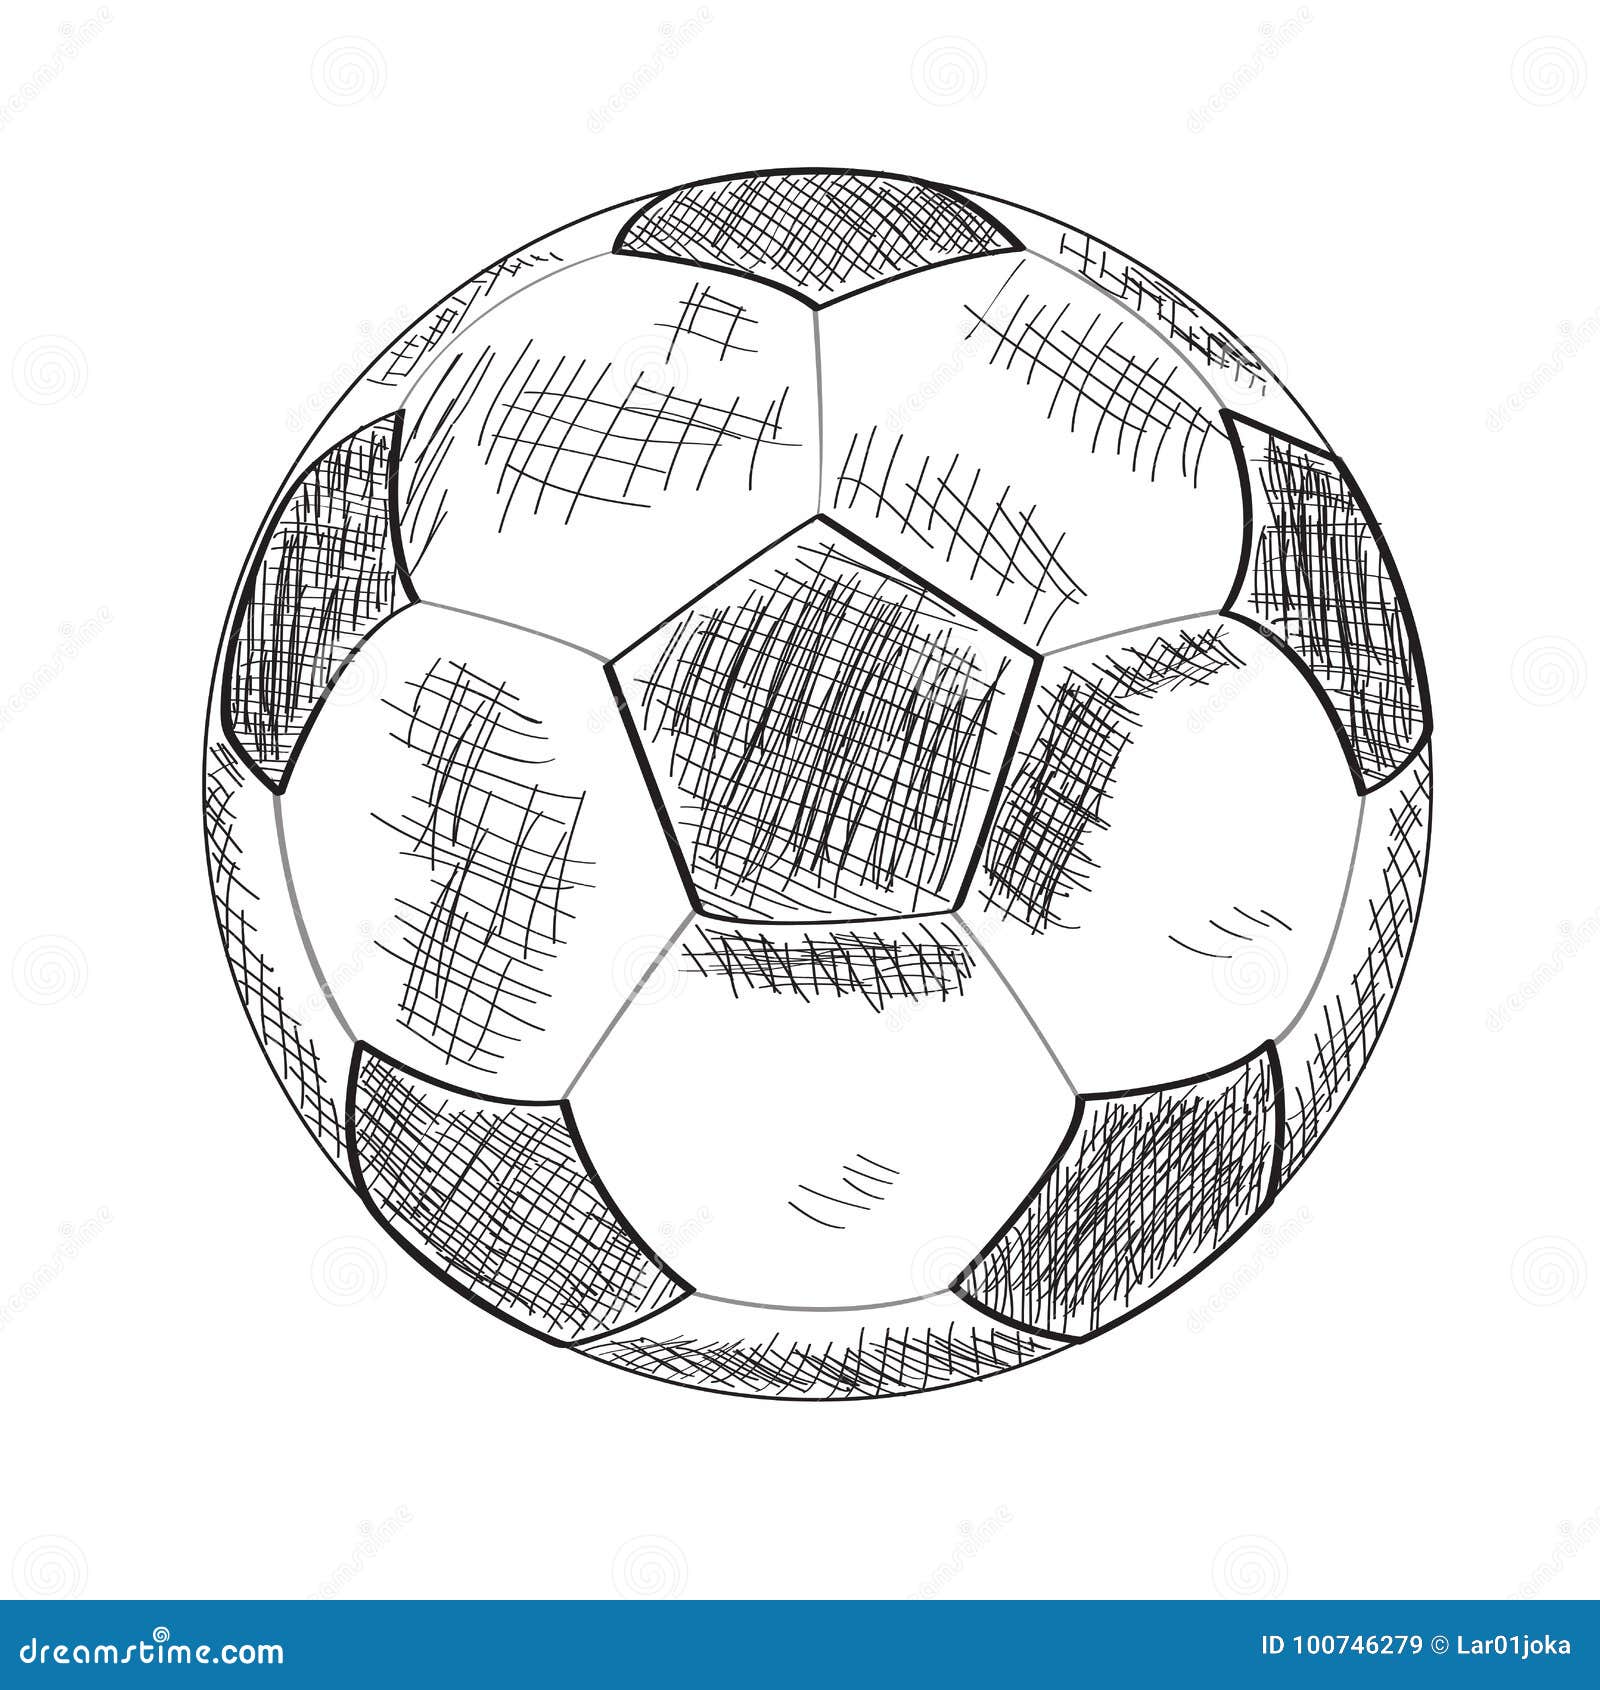 How to Draw a Soccer Ball with Flames - YouTube